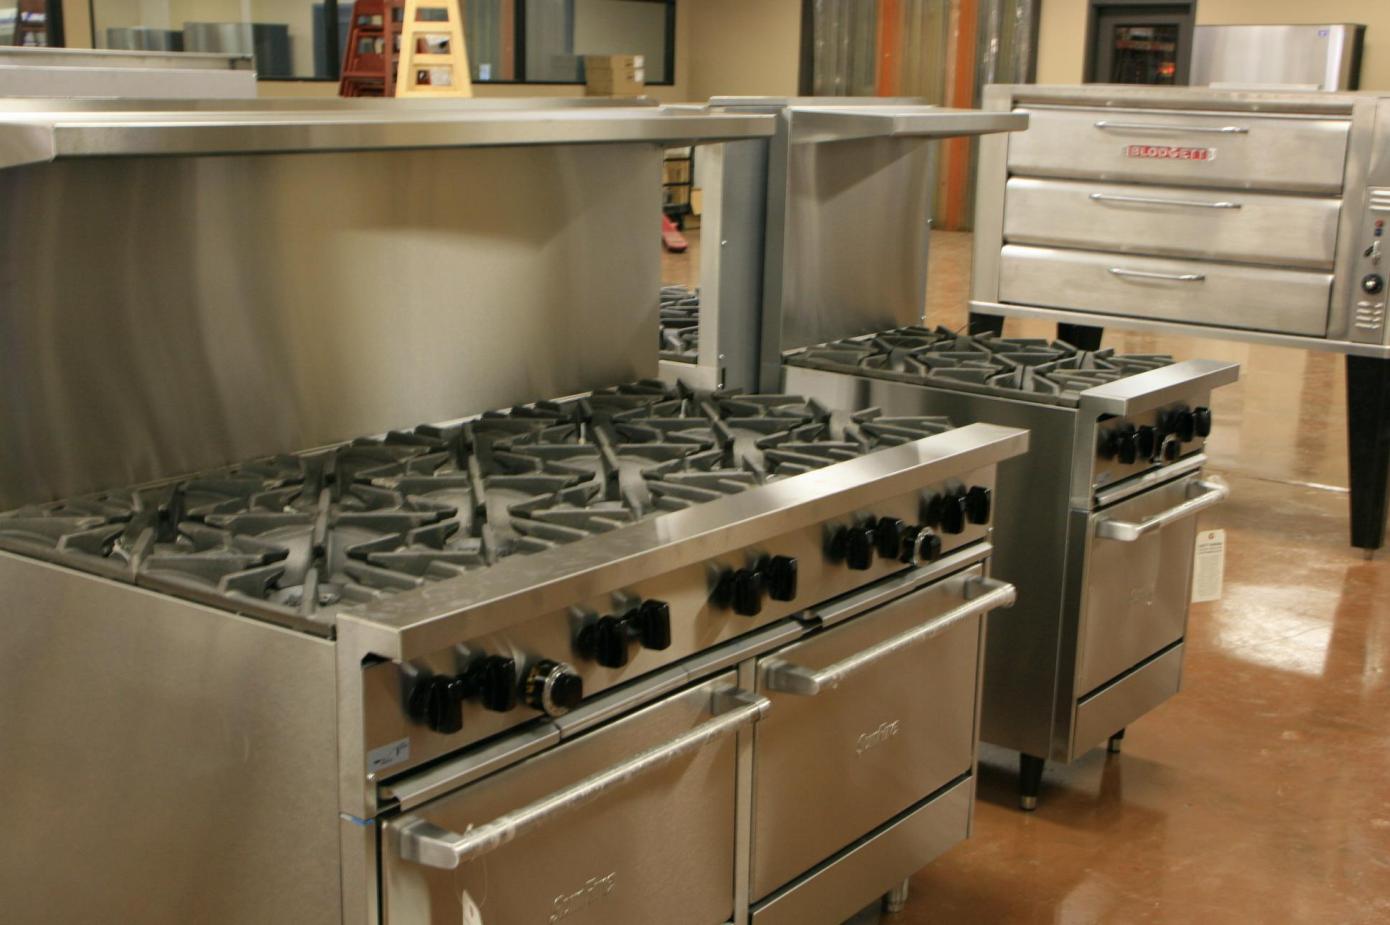 What Are the Safety Considerations When Using Catering Equipment?